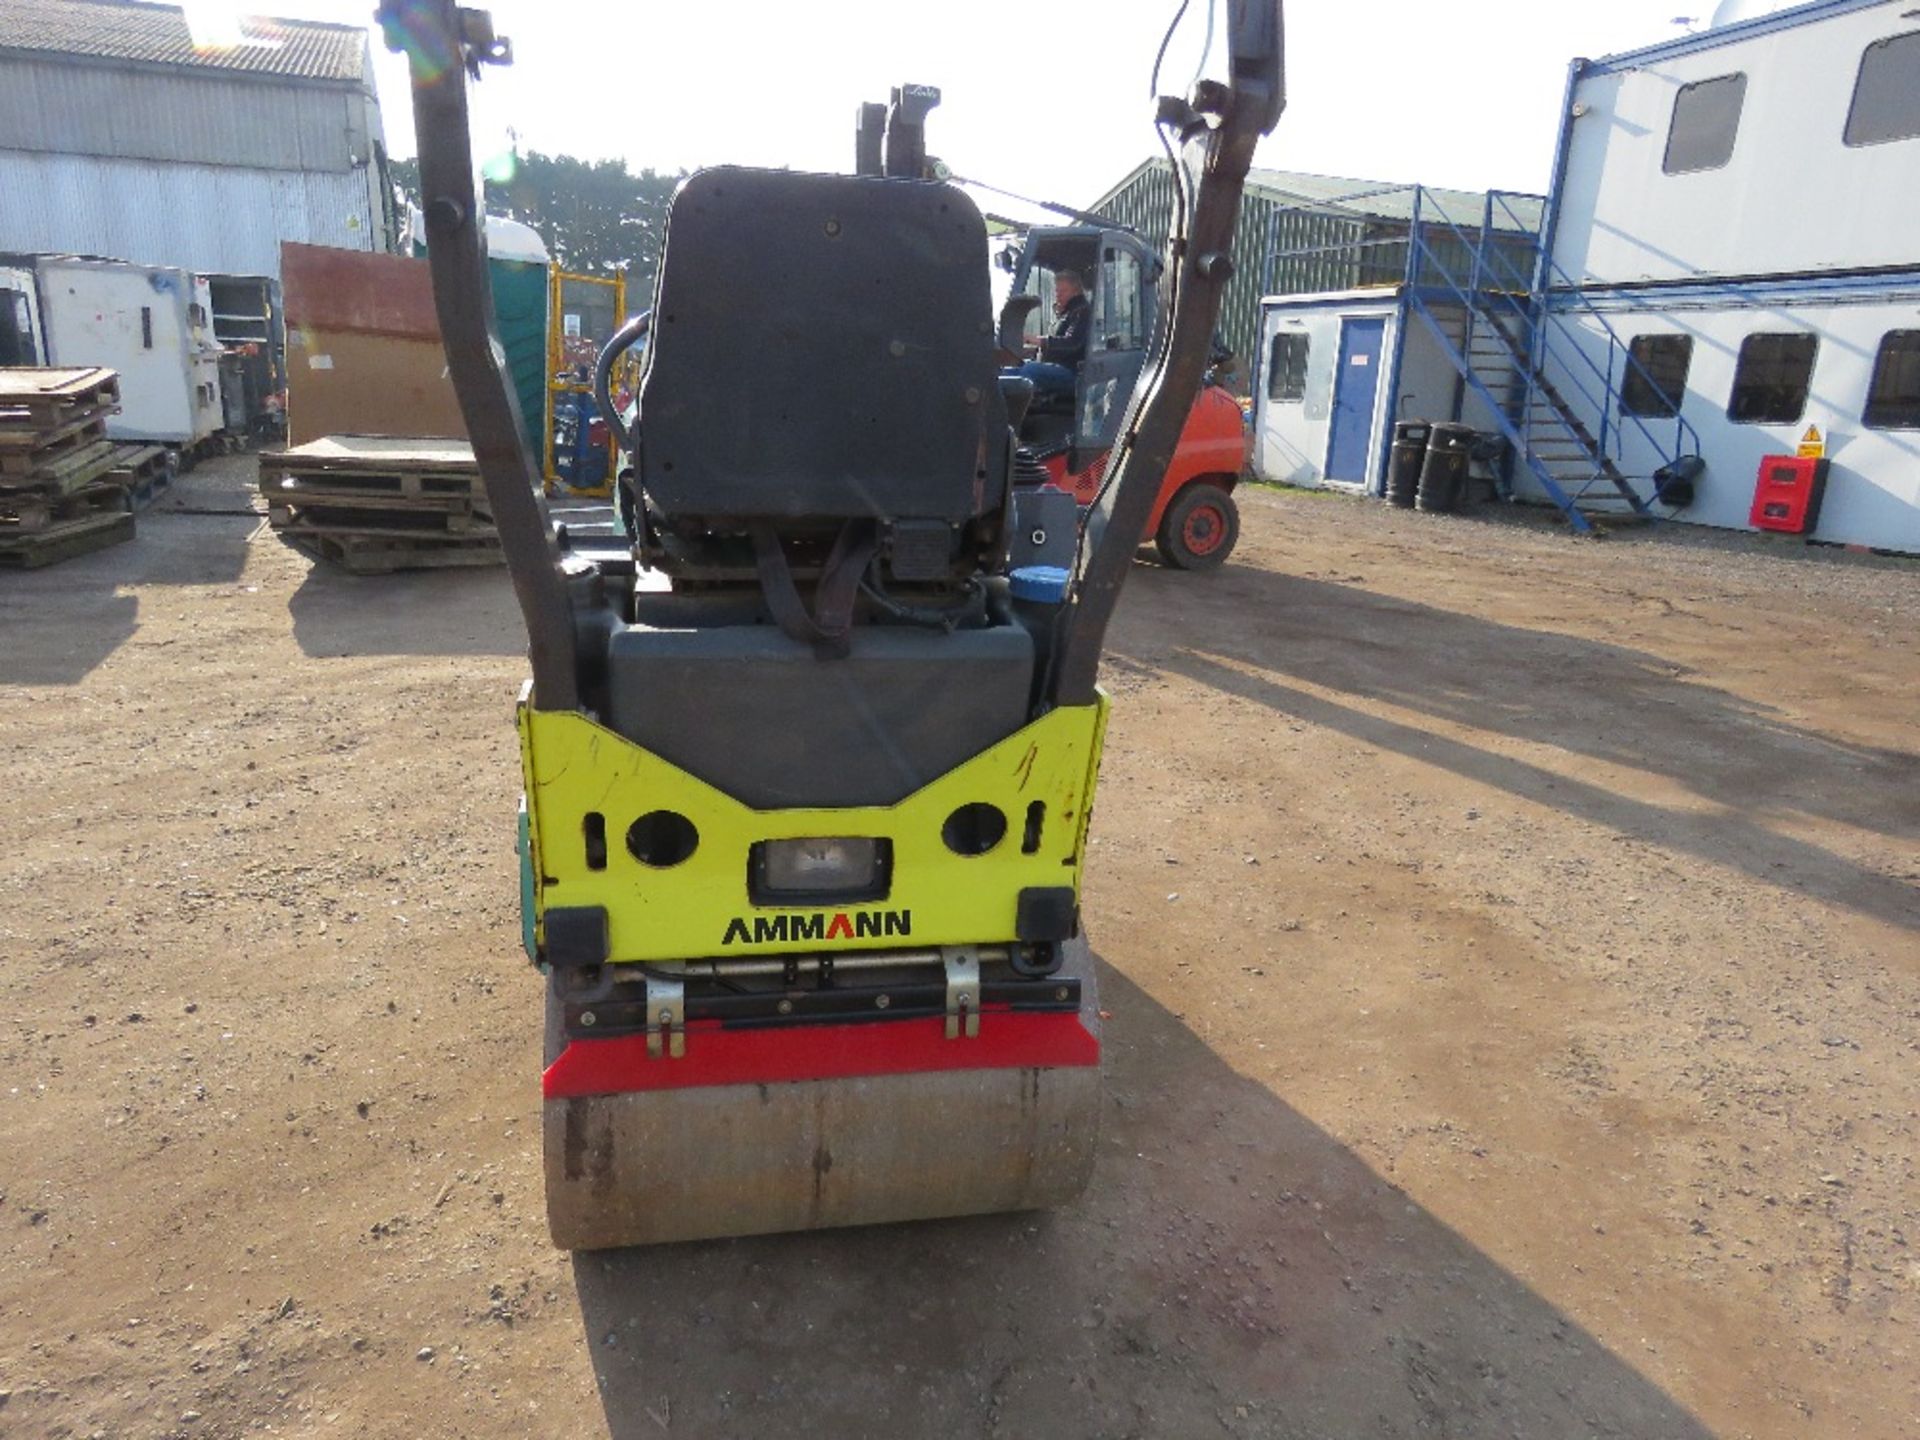 AMMANN ARX12 DOUBLE DRUM RIDE ON ROLLER YEAR 2013 BUILD. 812.3 REC HOURS. SN:TFAARX12ED0013258. DIRE - Image 4 of 13